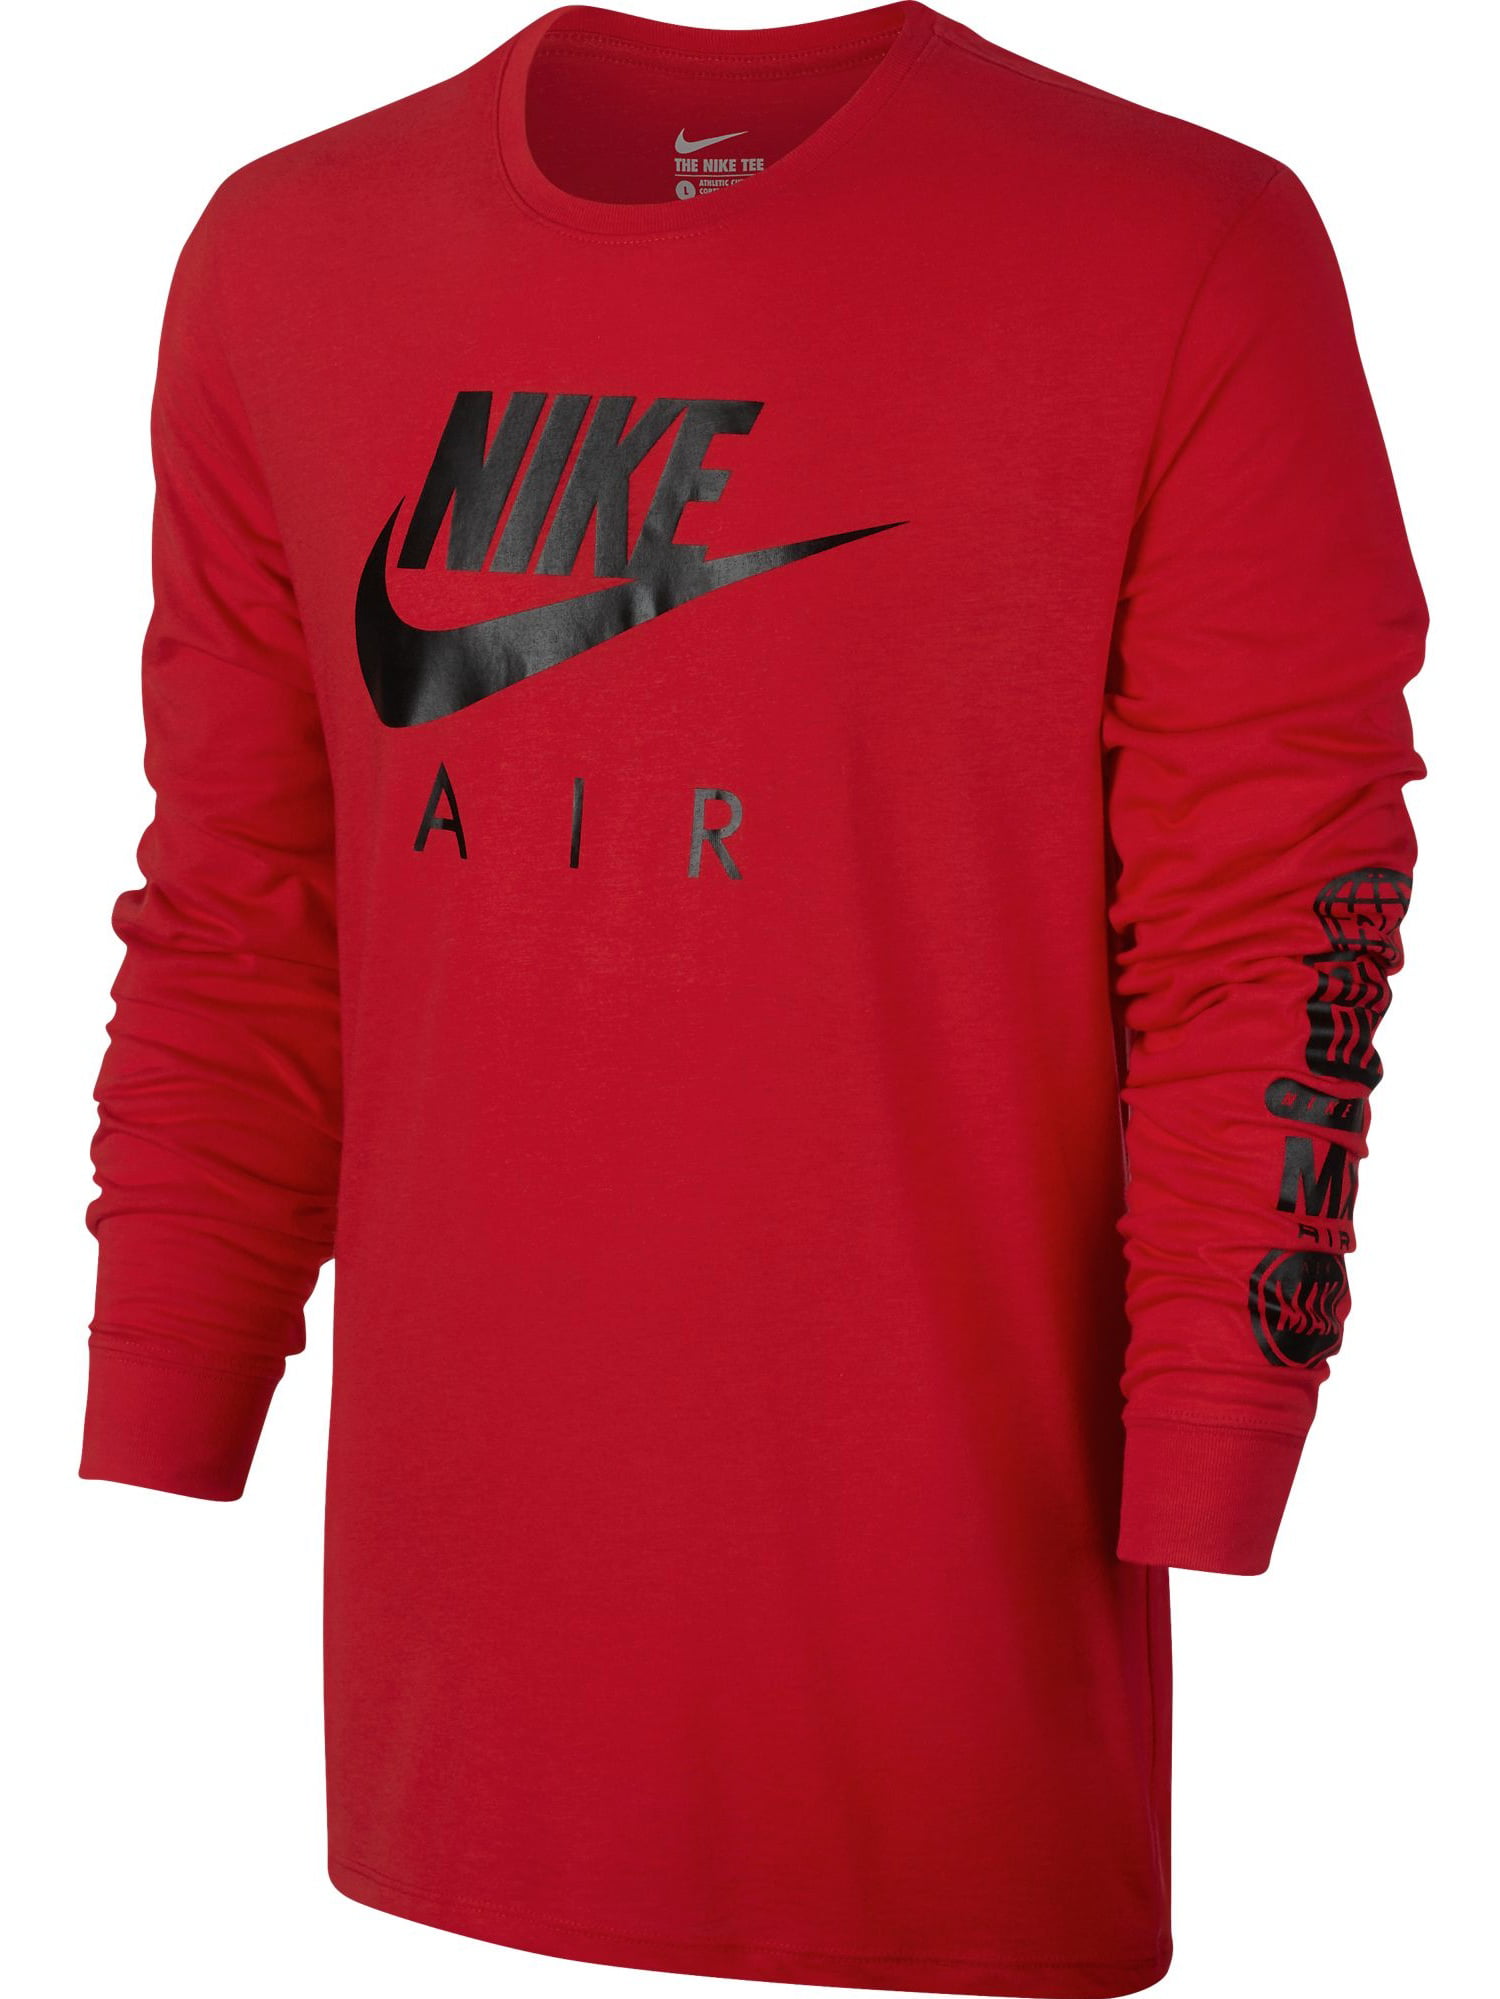 black nike shirt with red swoosh